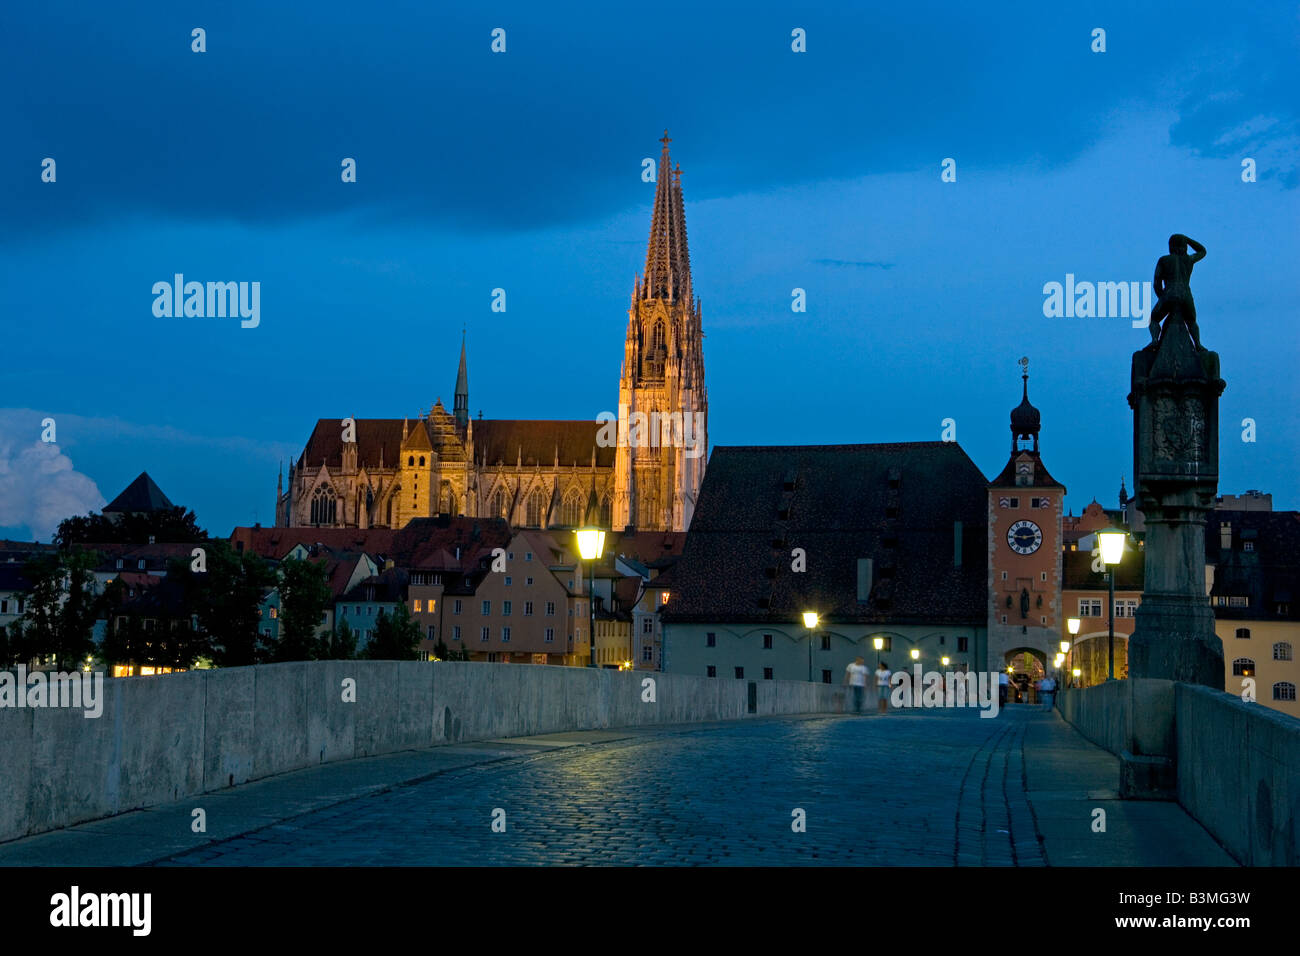 Deutschland, Bayern, Regensburger Dom bei Nacht, Danube river and Saint Peters cathedral, Regensburg, Germany Stock Photo